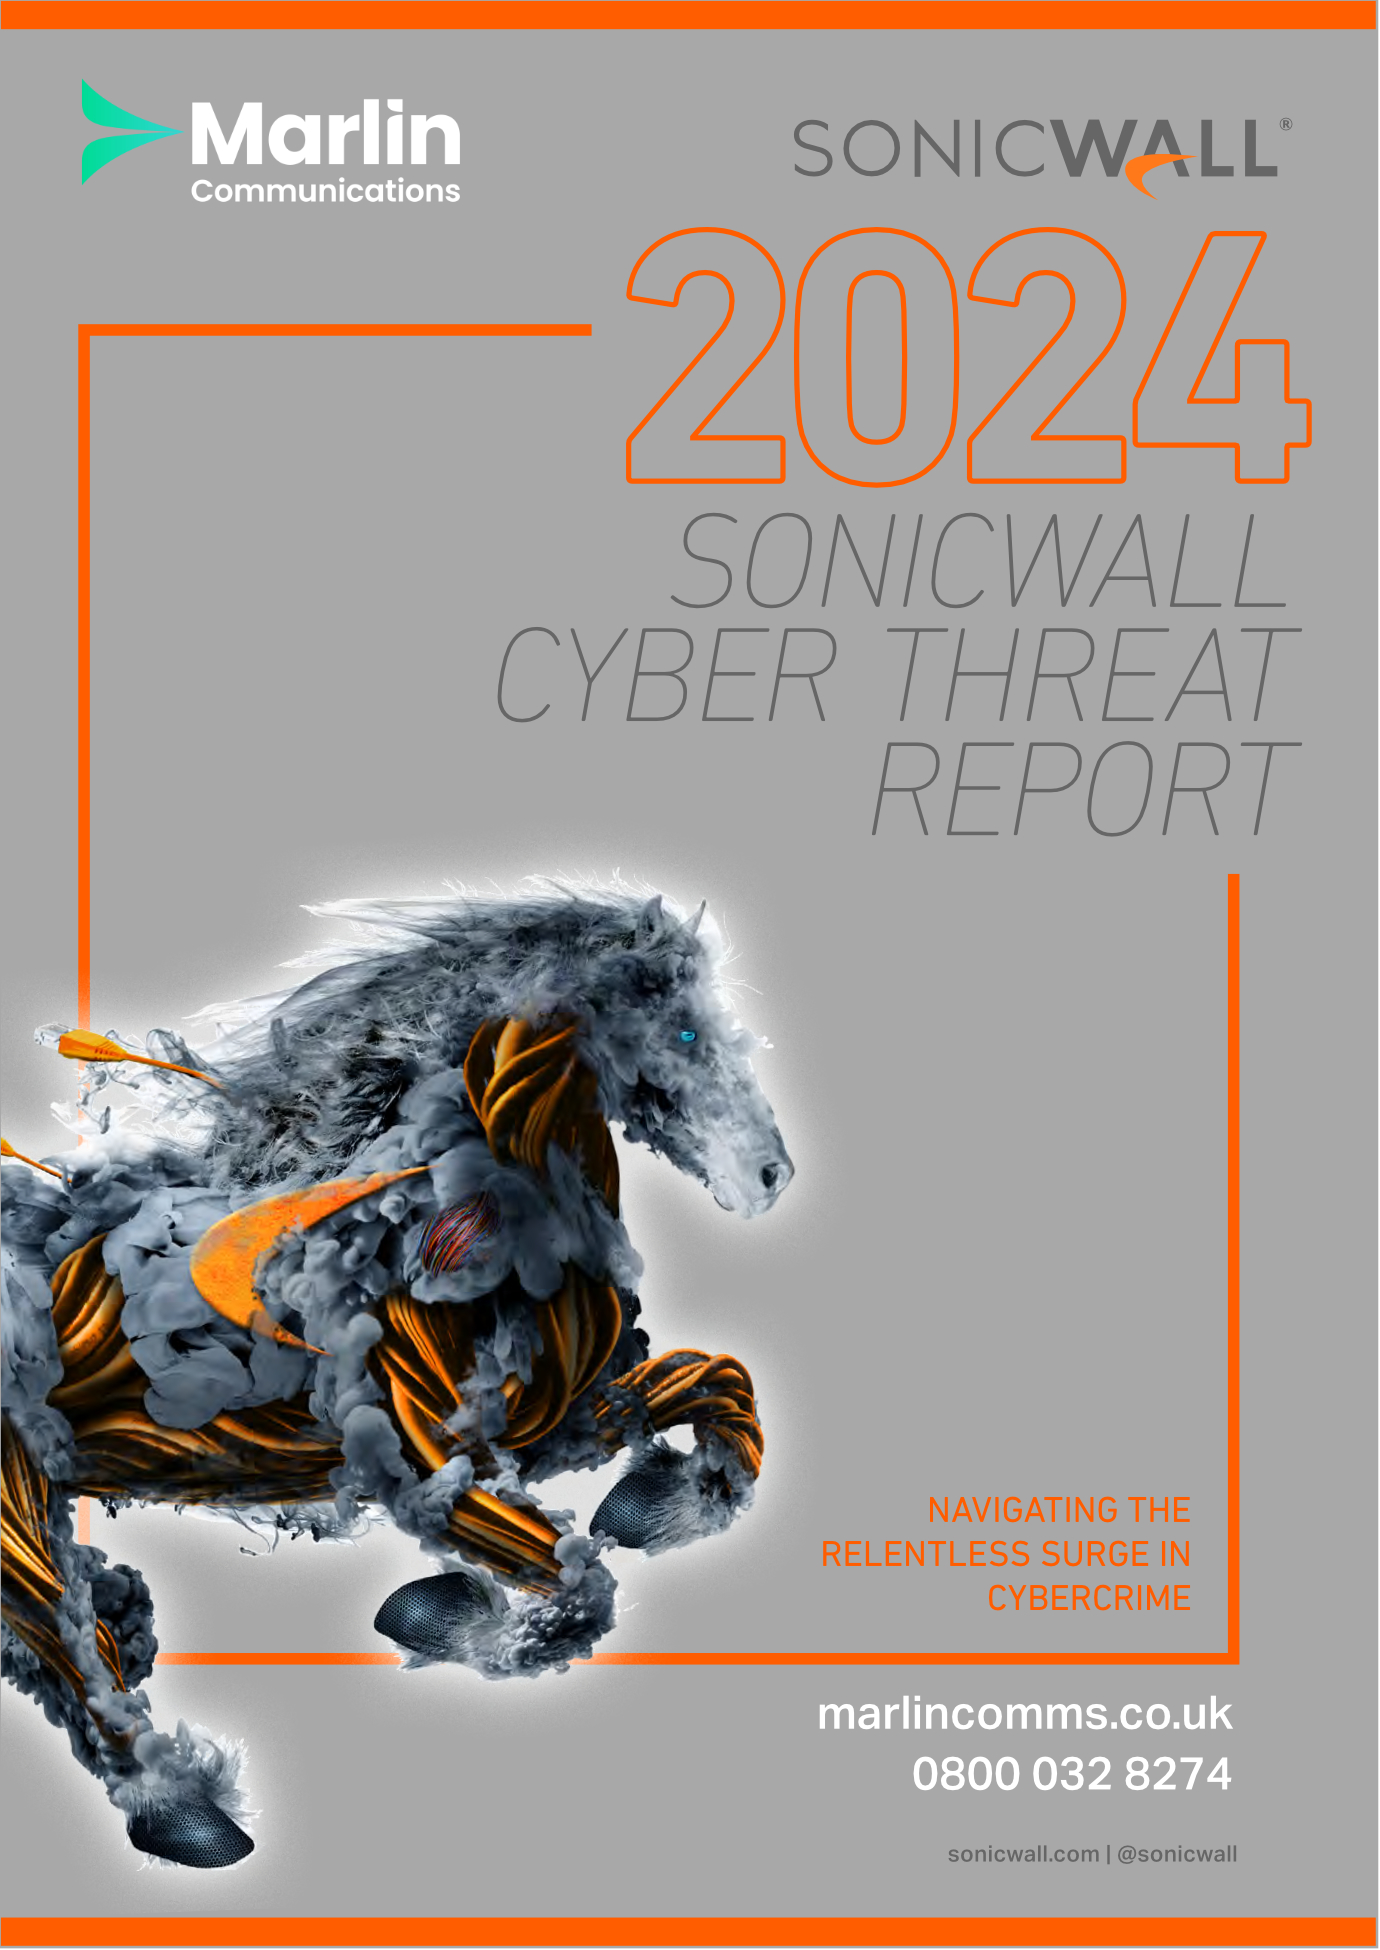 SonicWall - Marlin Cybersecurity Threat Report